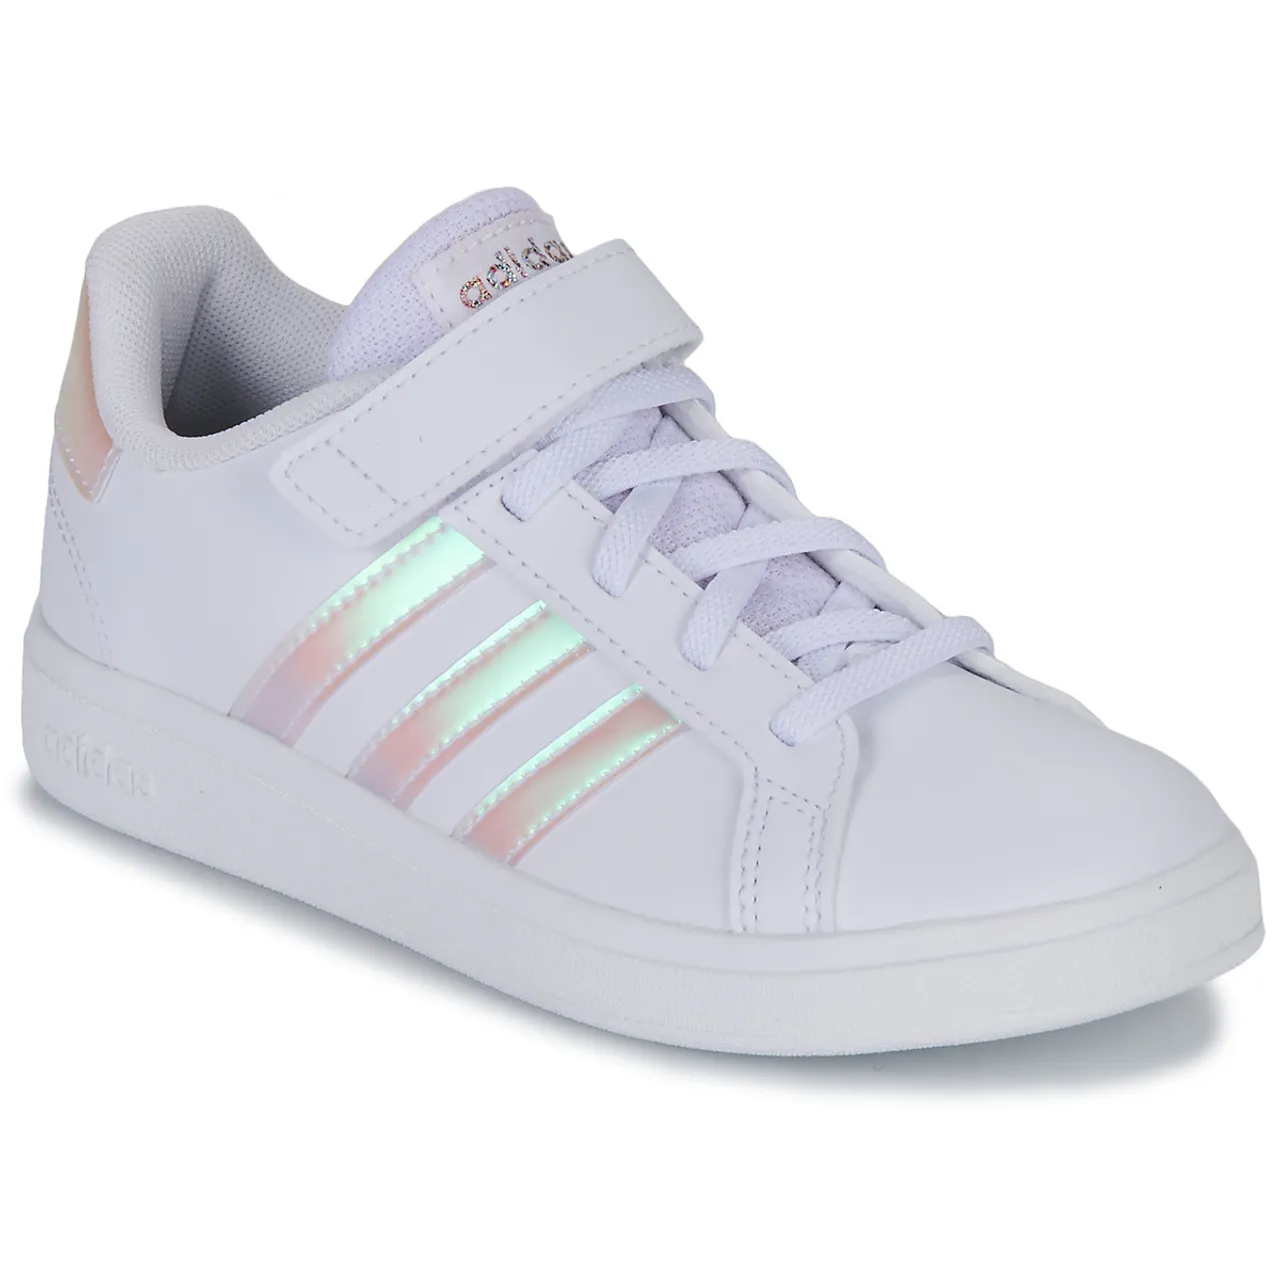 adidas  GRAND COURT 2.0 EL  girls's Children's Shoes (Trainers) in White